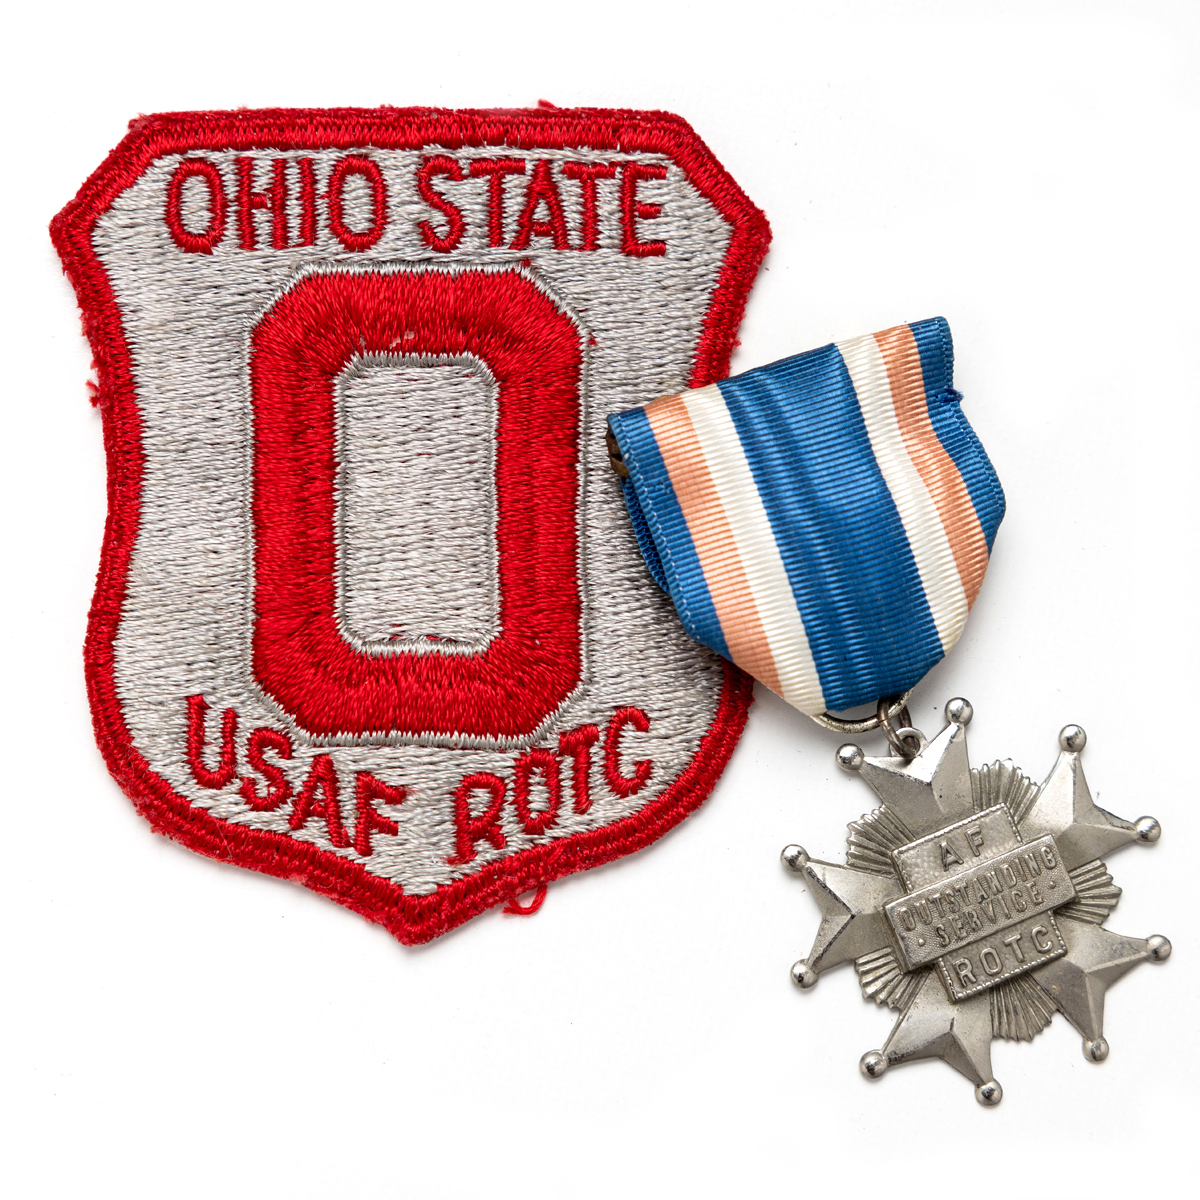 A patch and medal slightly overlap. The scarlet and gray patch says Ohio State USAF ROTC and features a block O. You can see the embroidery threads used to make it. The star-shaped medal hangs from a blue, peach and white ribbon. The medal says AF ROTC Outstanding service.